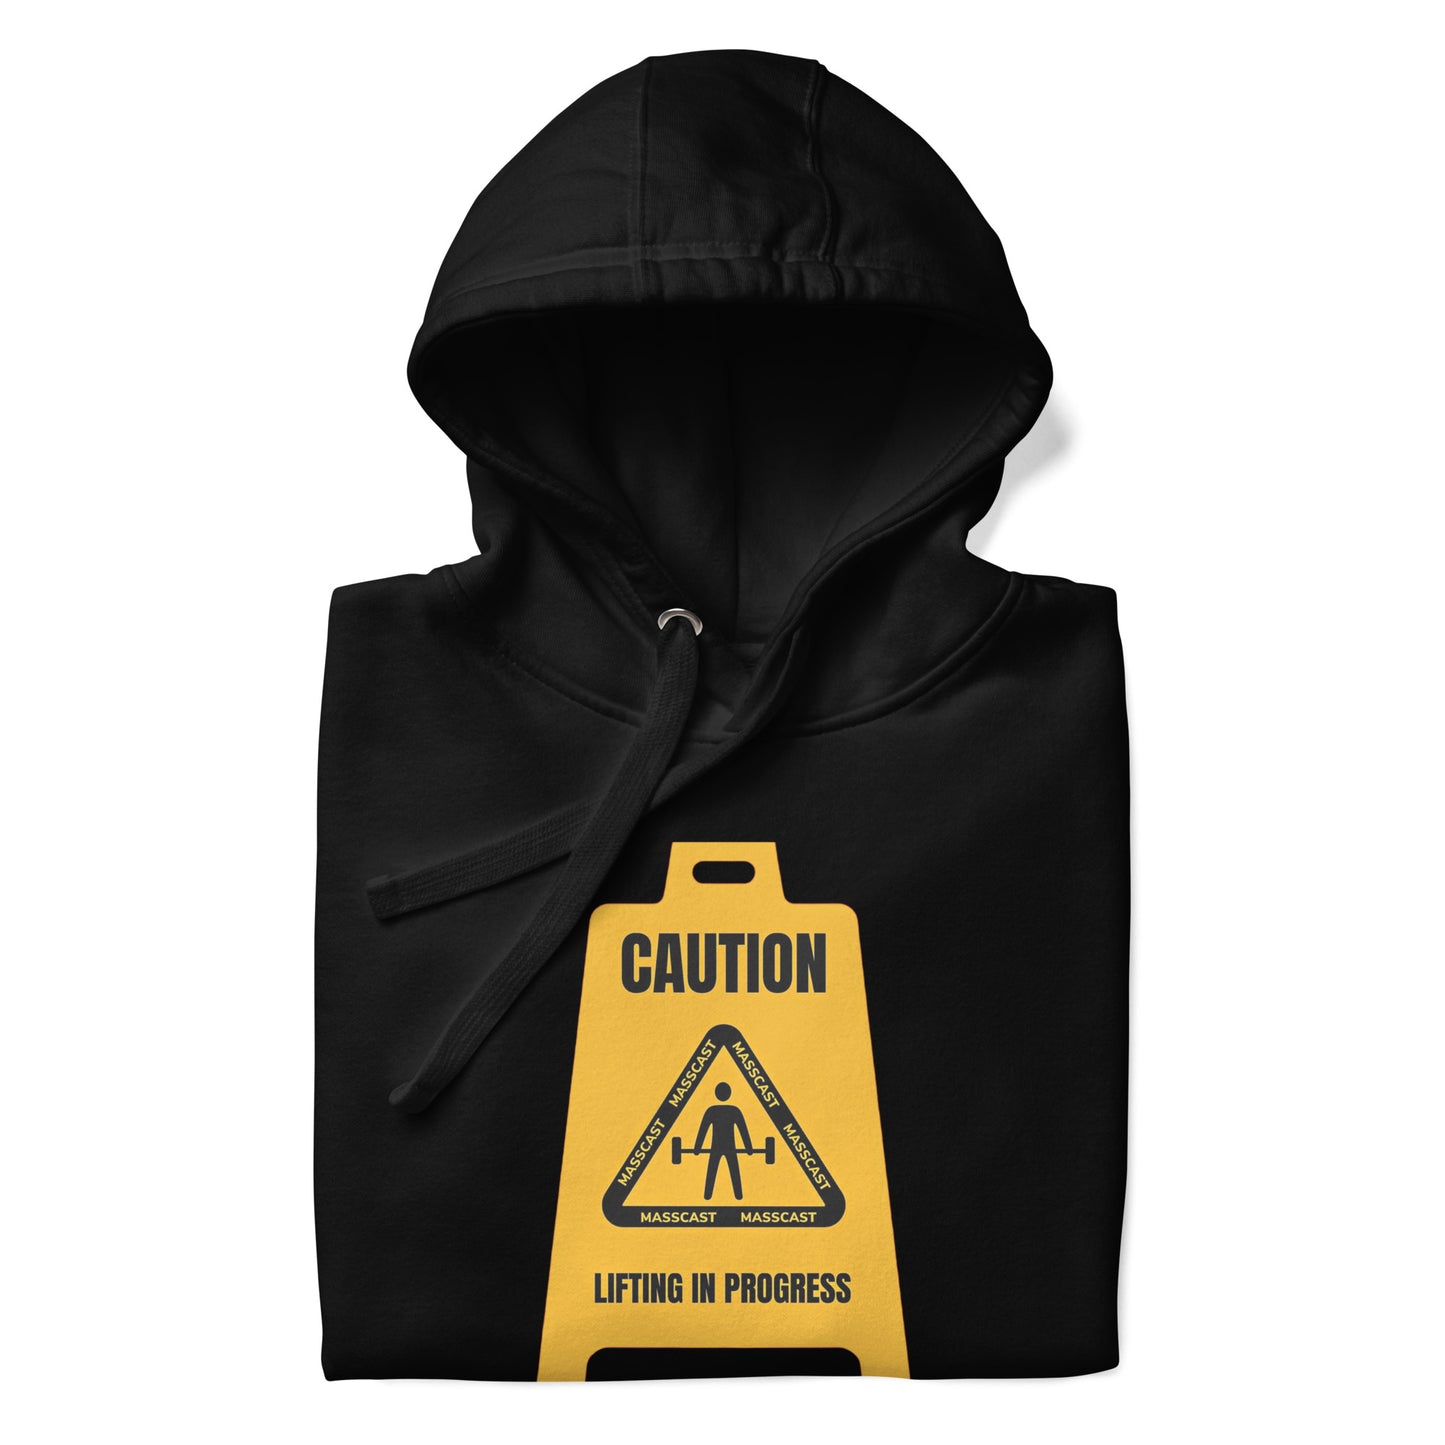 Caution Soft Style Hoodie by Mass Cast